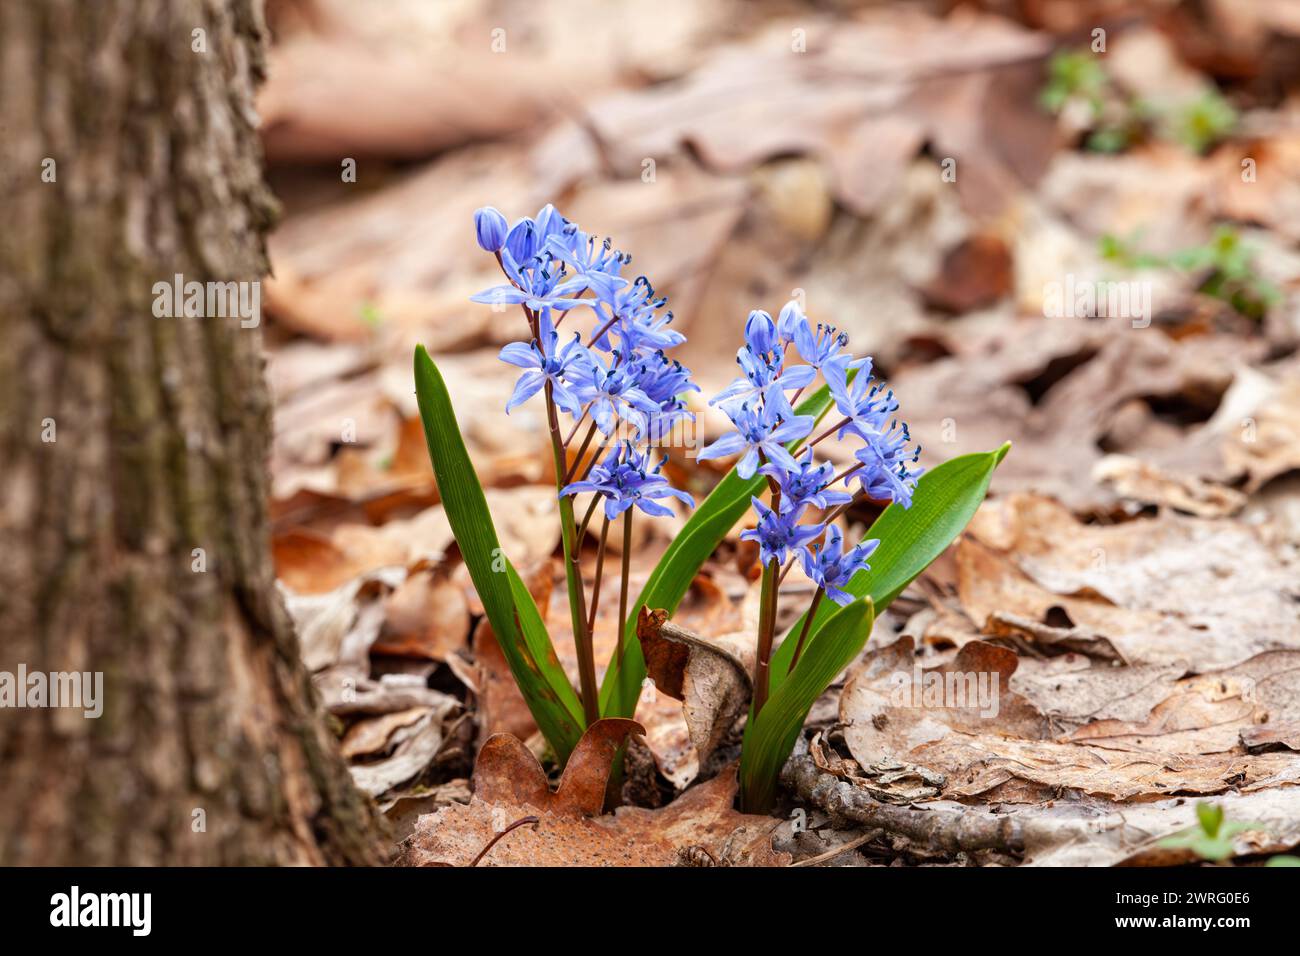 A small blue flower, a terrestrial plant, is blooming next to a tree trunk. This flowering plant, with petals, stands out among the grass and subshrub Stock Photo